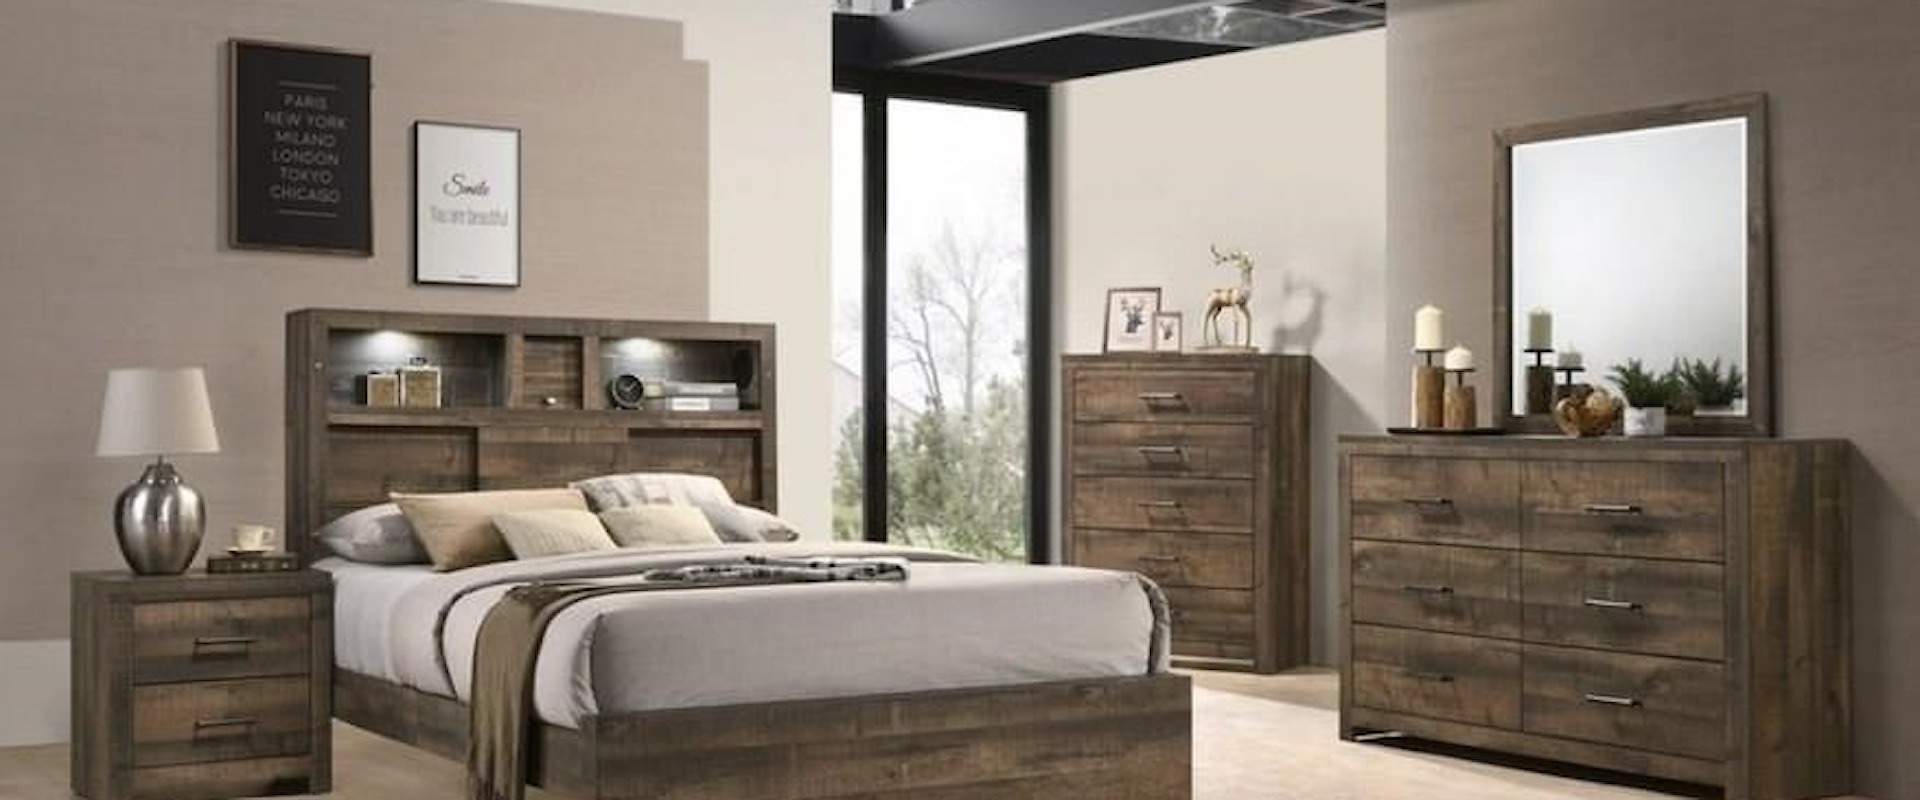 6 Piece Full Bookcase Bead with Bluetooth Speakers in Headboard, Dresser, Mirror and Nightstand Set